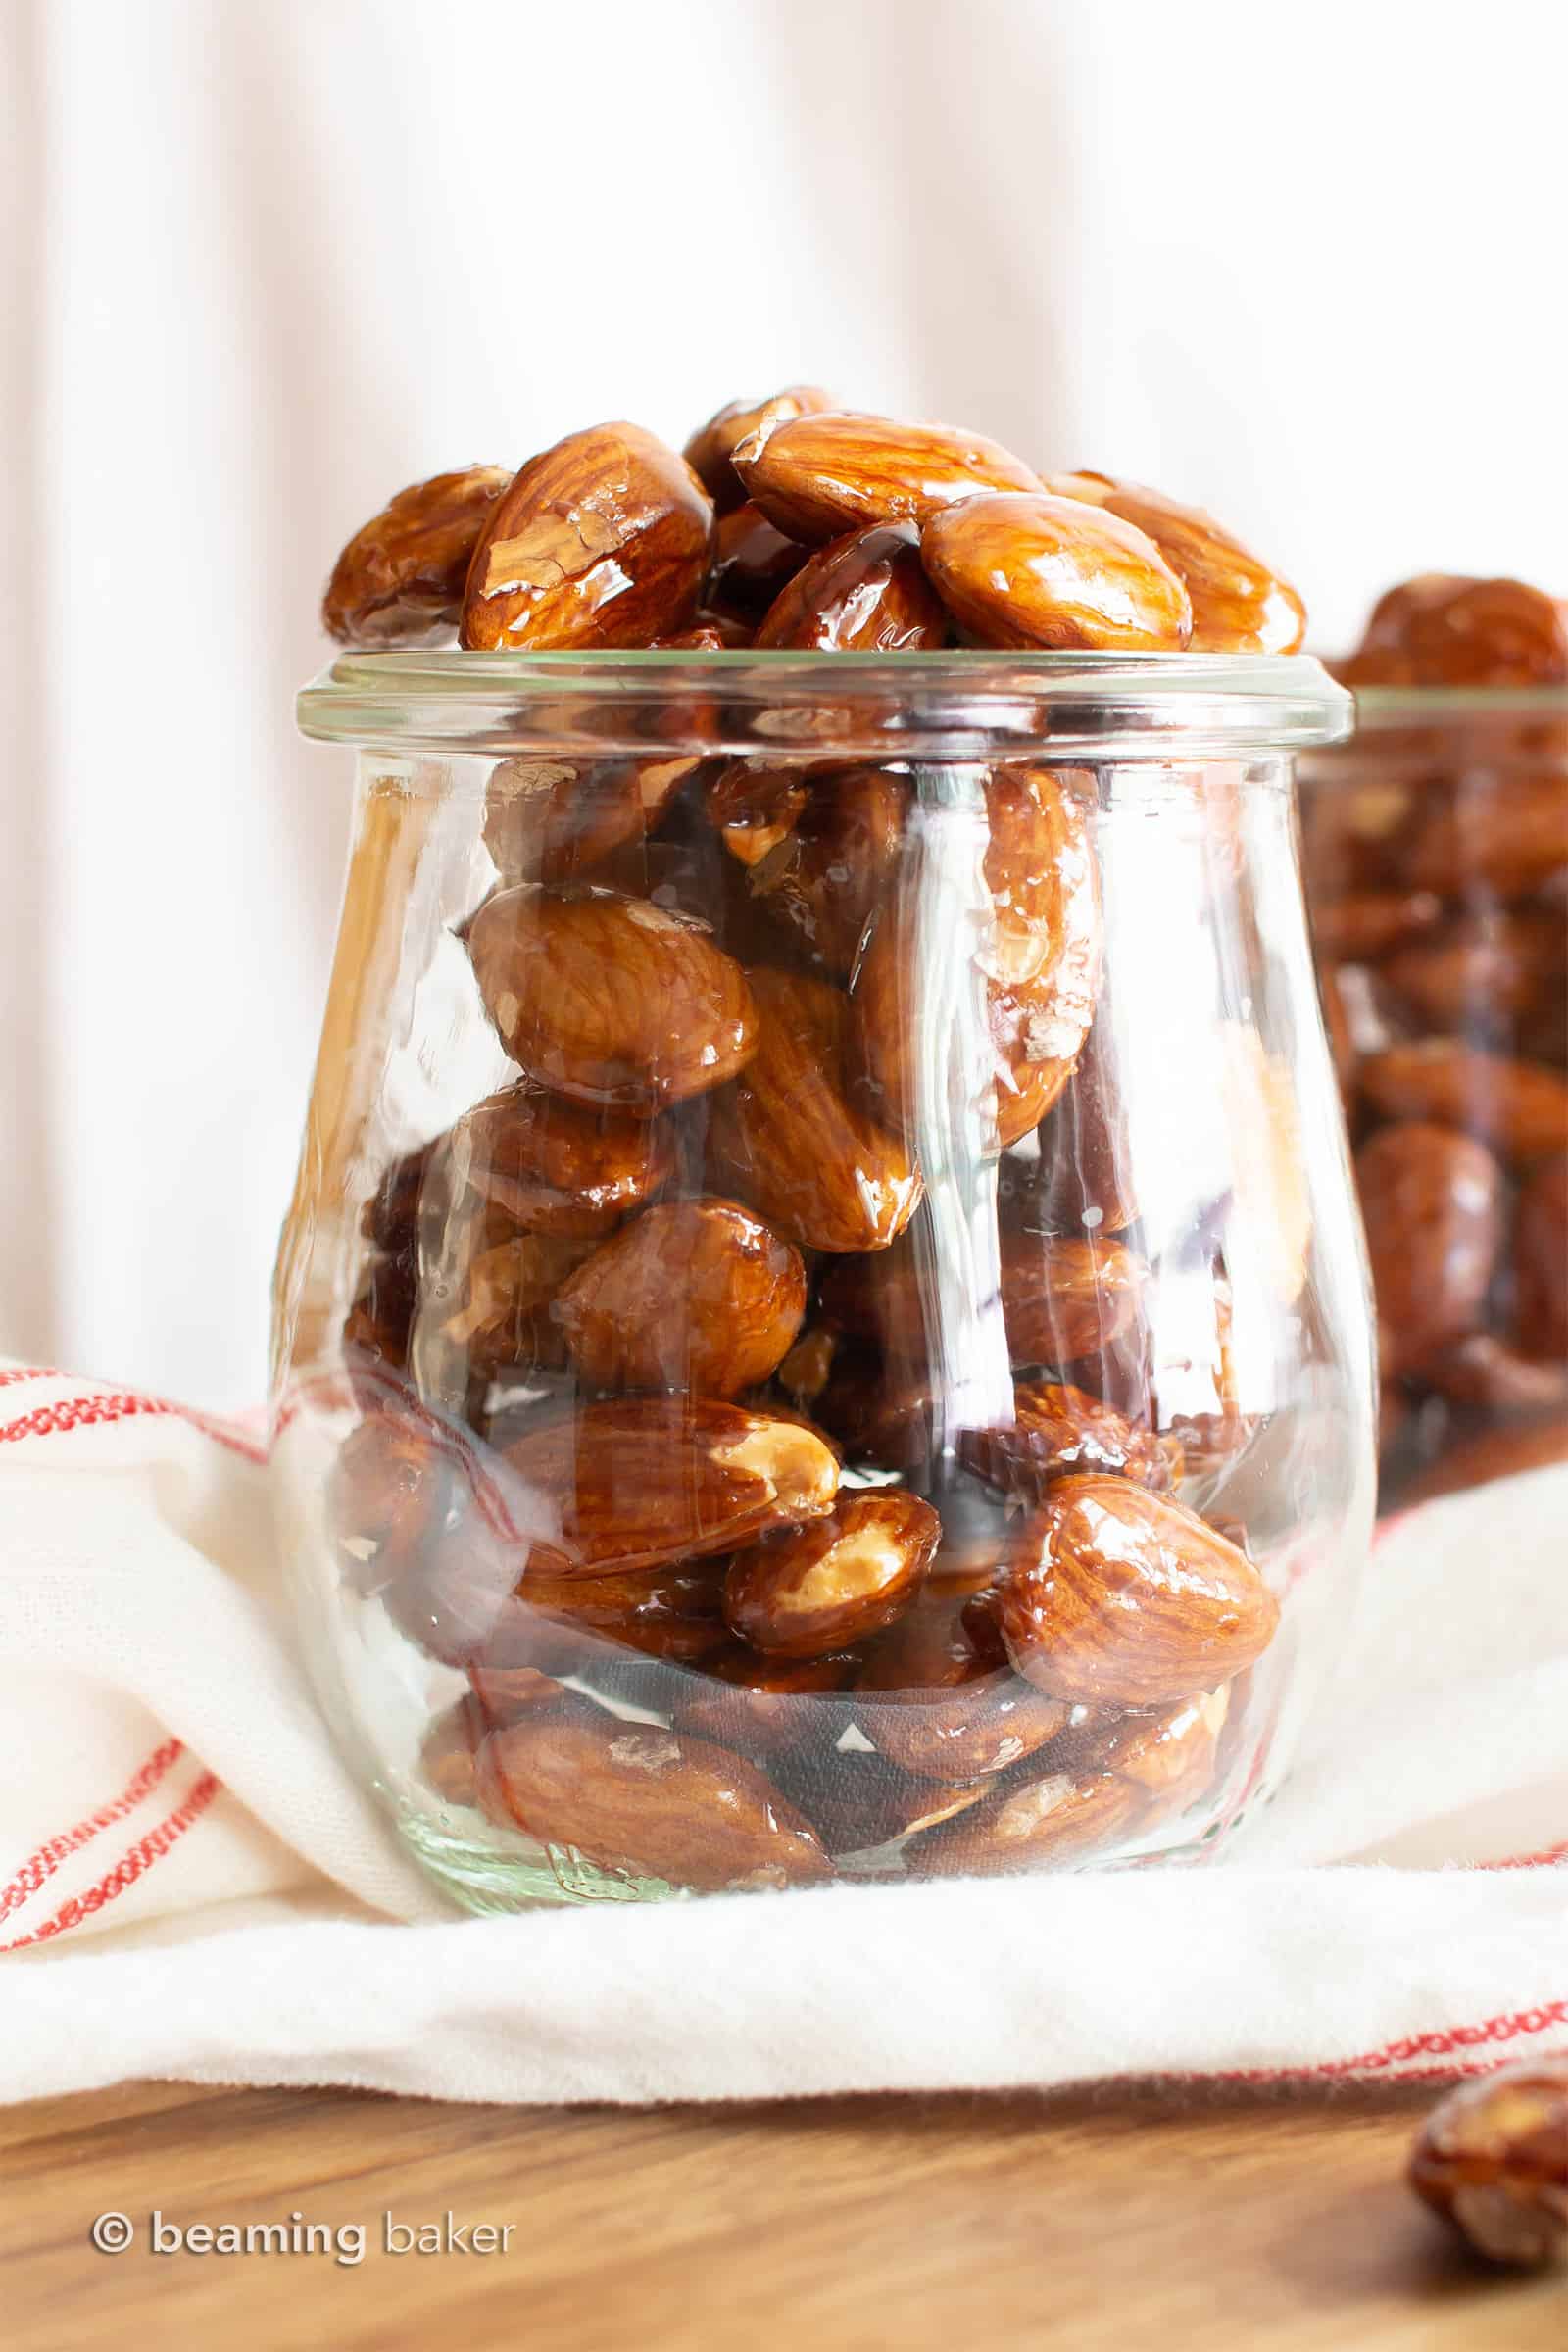 Paleo Candied Almonds: 5-minute stovetop EASY candied almonds recipe! Learn how to make the BEST vegan candied almonds—sweet, healthy & gluten free! #Almonds #Paleo #Vegan #Healthy #Christmas | Recipe at BeamingBaker.com